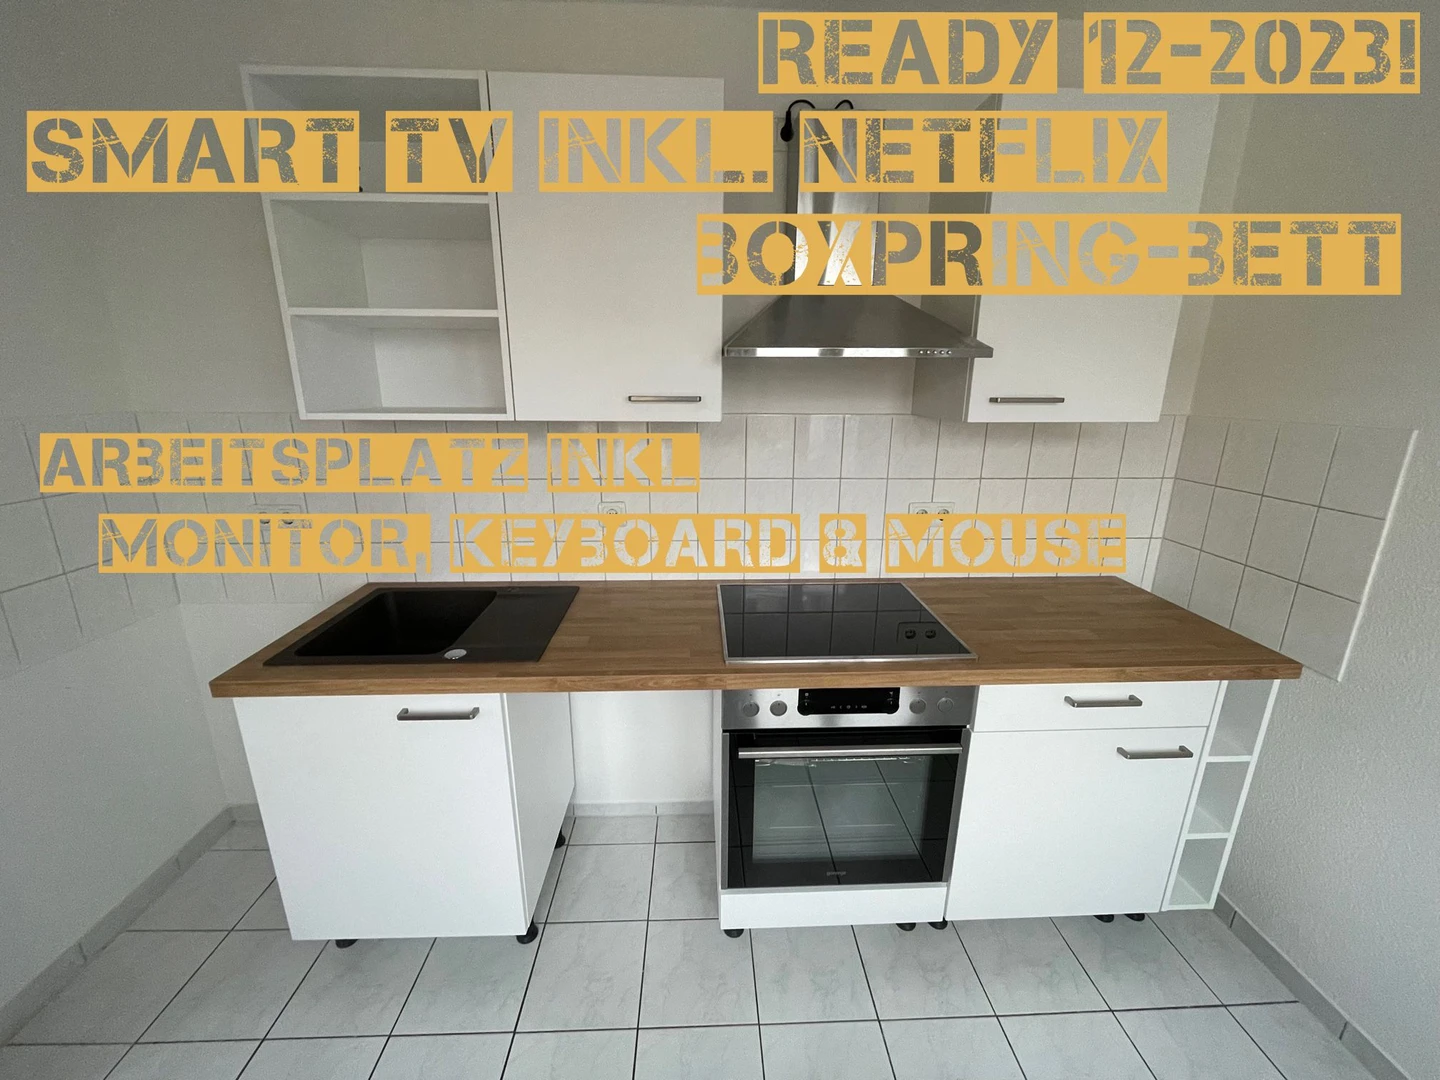 Renting rooms by the month in Magdeburg